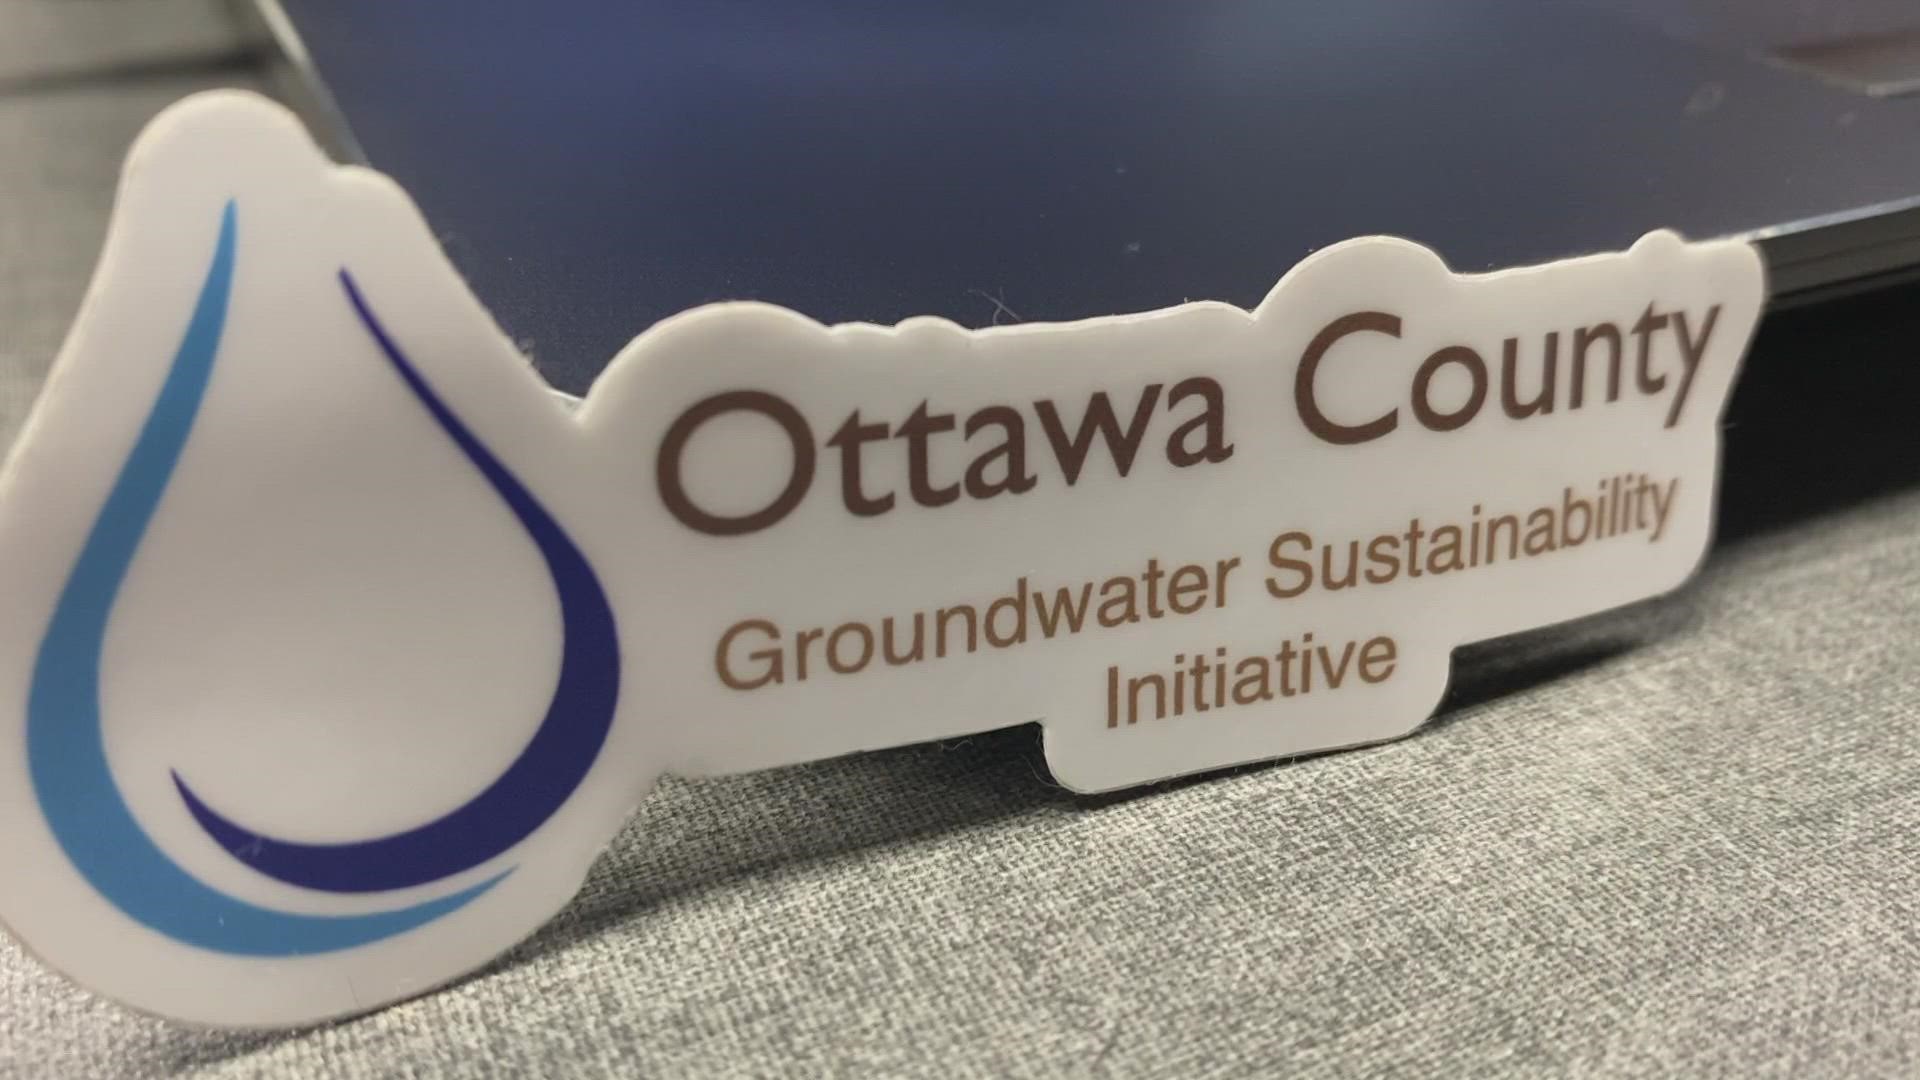 Ottawa County officials said this money will be the first step in taking real action to fix the county's groundwater crisis.